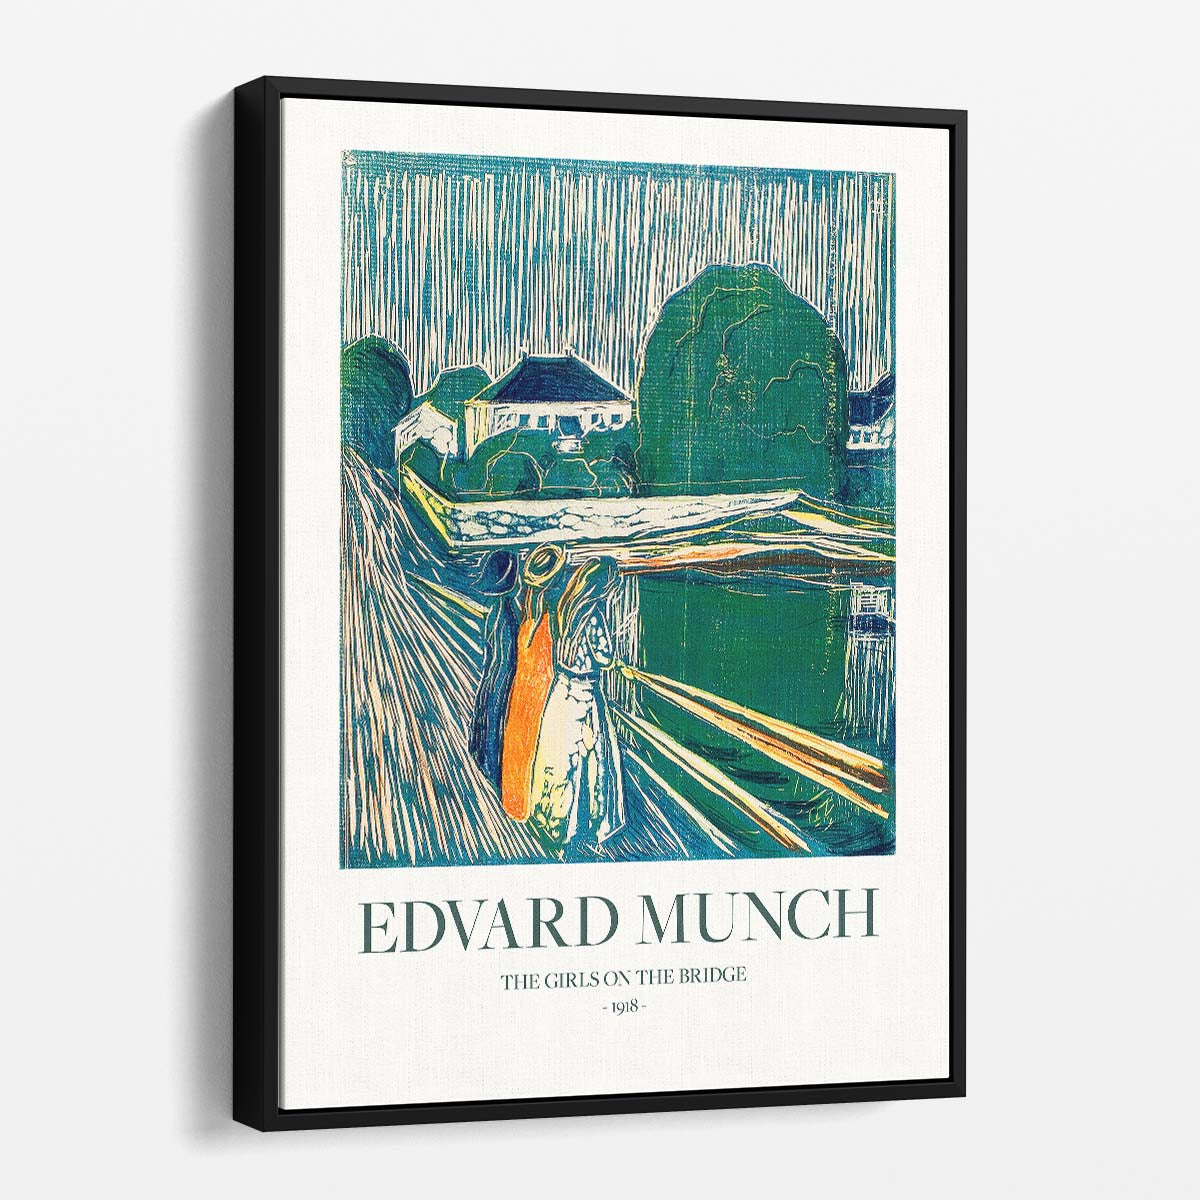 Edvard Munch's 1918 Acrylic Painting 'Girls On The Bridge' by Luxuriance Designs, made in USA